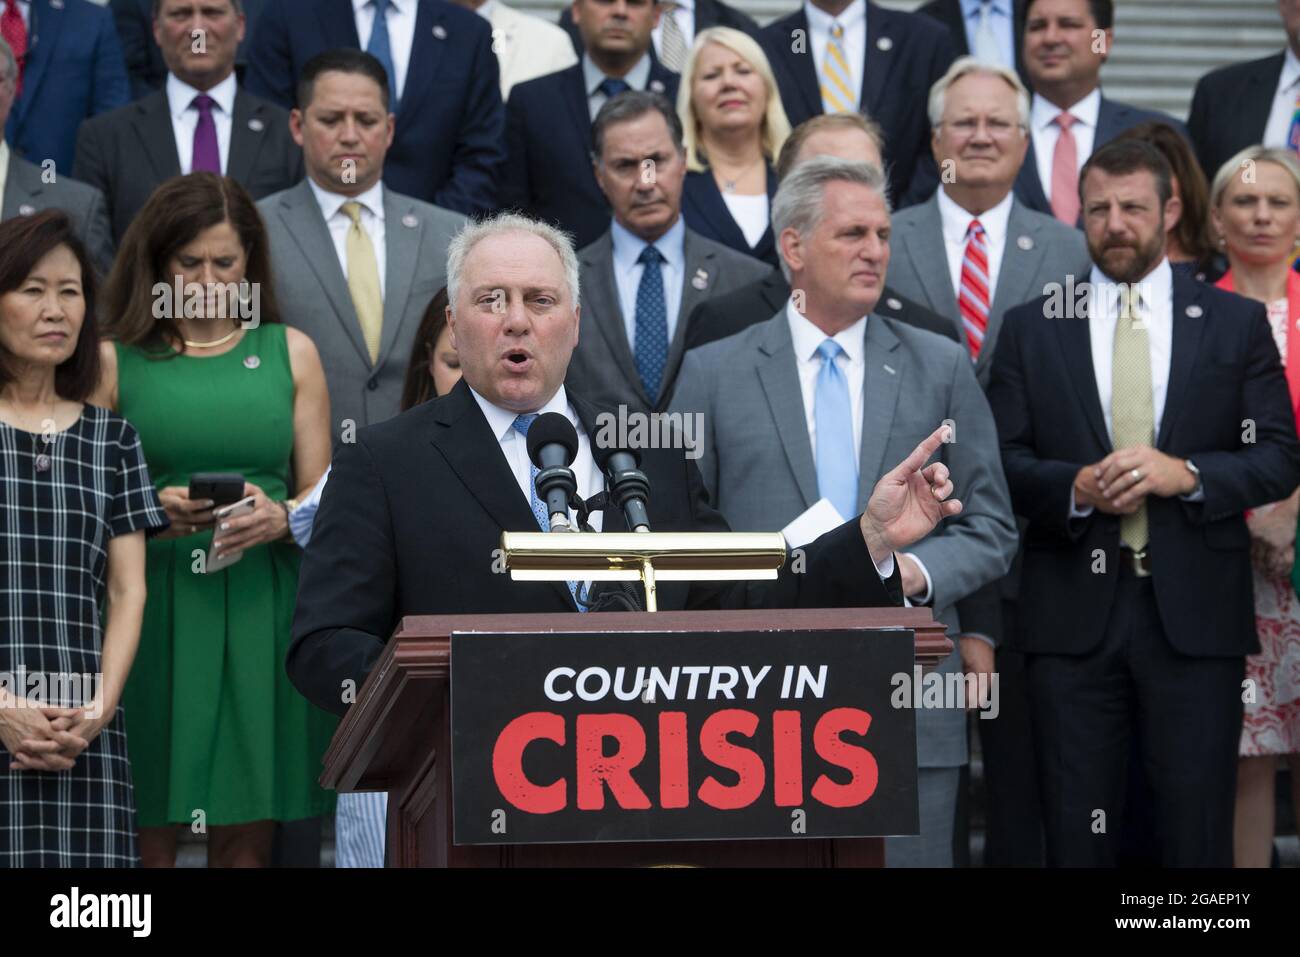 United States House Minority Whip Steve Scalise (Republican of Louisiana) offers remarks on President Joe Biden and House Speaker Nancy Pelosi's leadership during a press conference outside of the US Capitol in Washington, DC, Thursday, July 29, 2021. Photo by Rod Lamkey/CNP/ABACAPRESS.COM Stock Photo